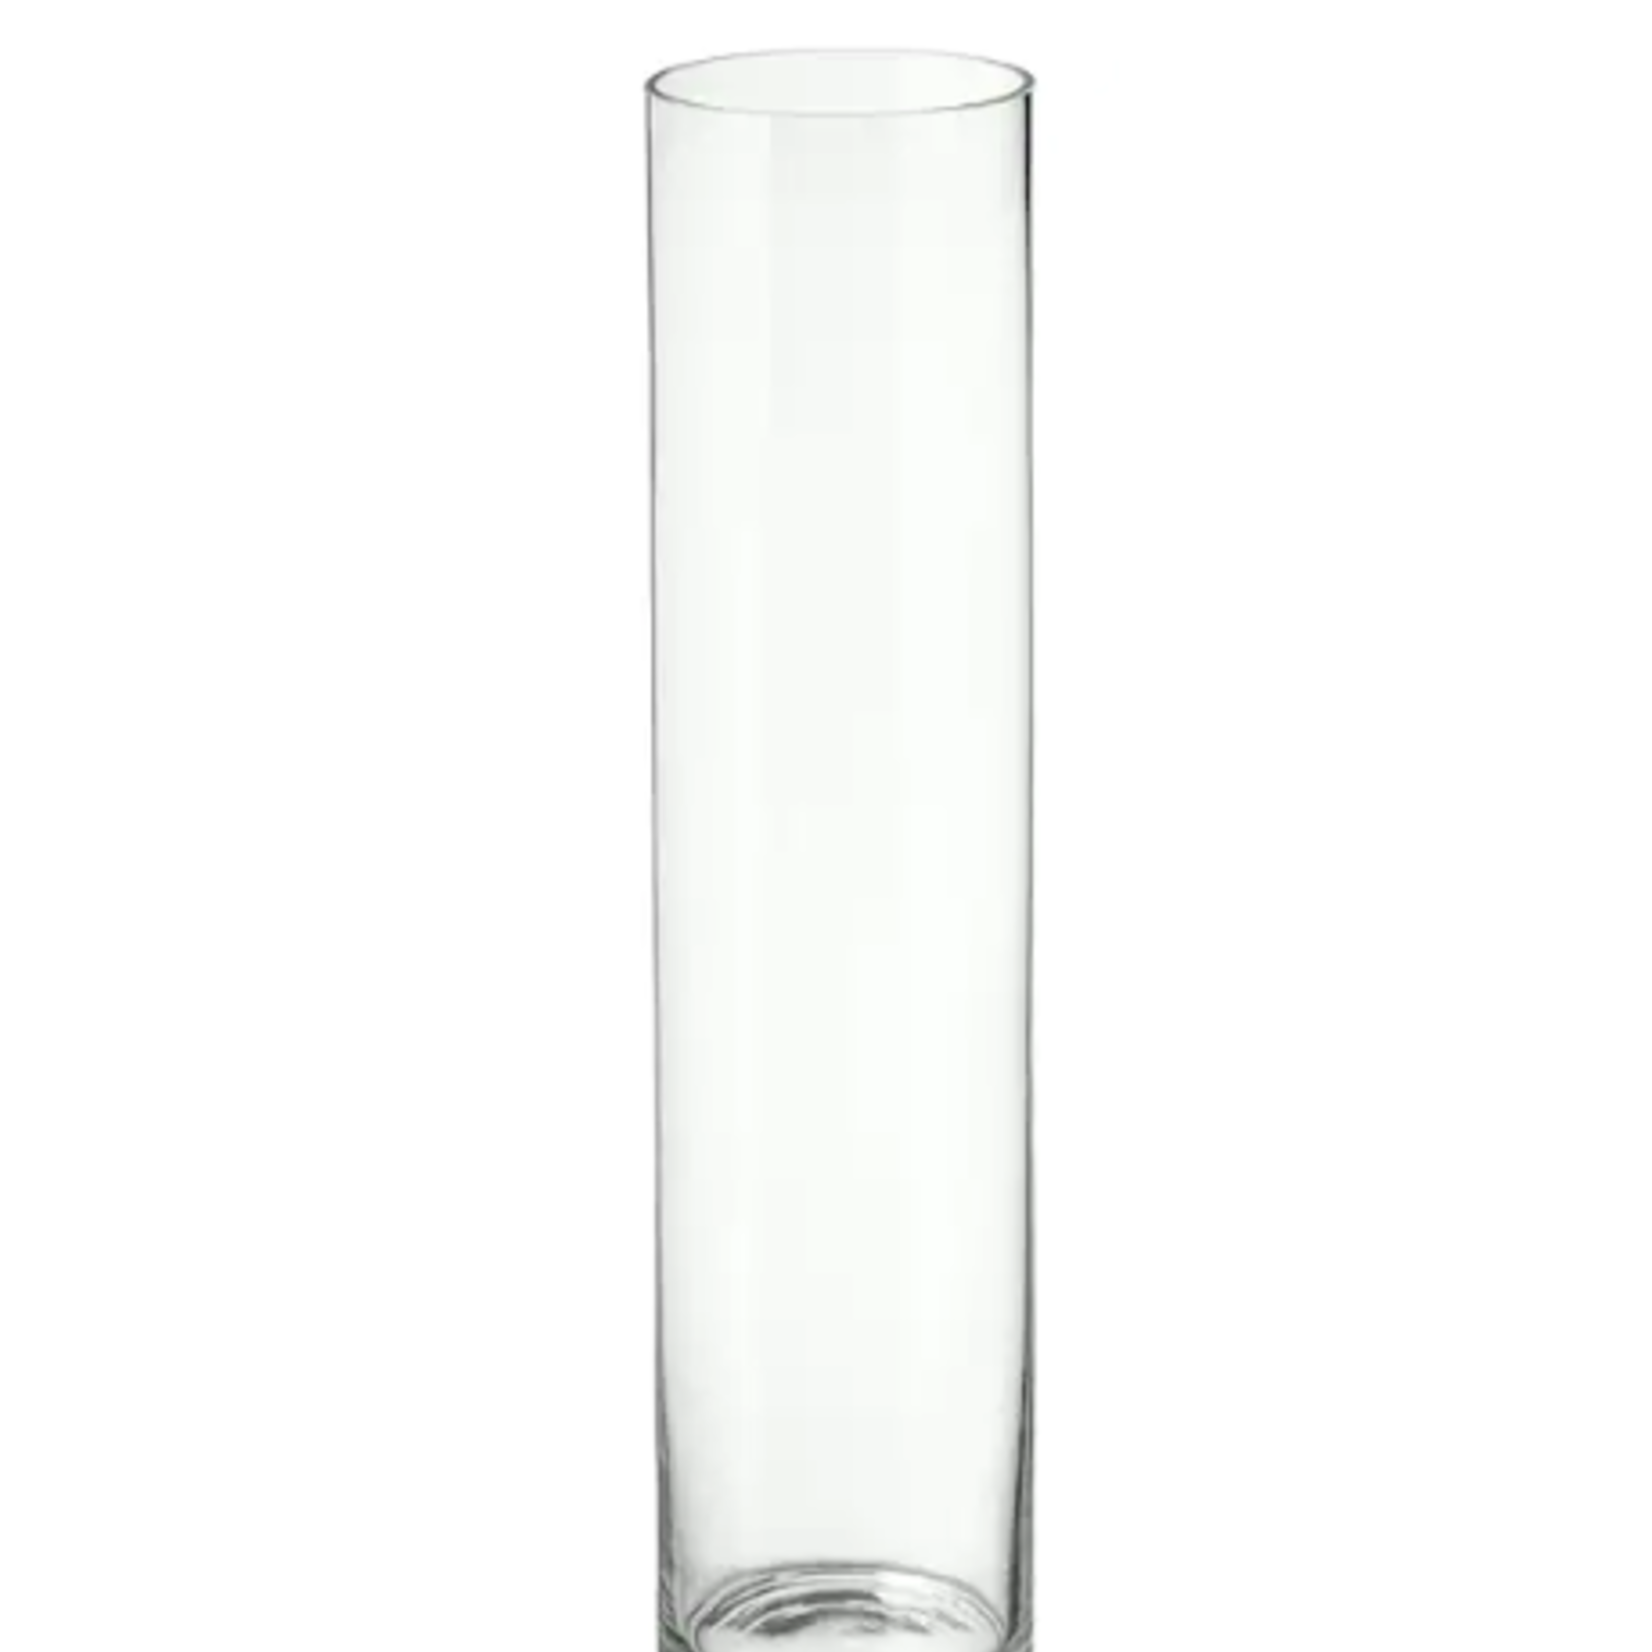 32"H X 8" CLEAR GLASS CYLINDER VASE